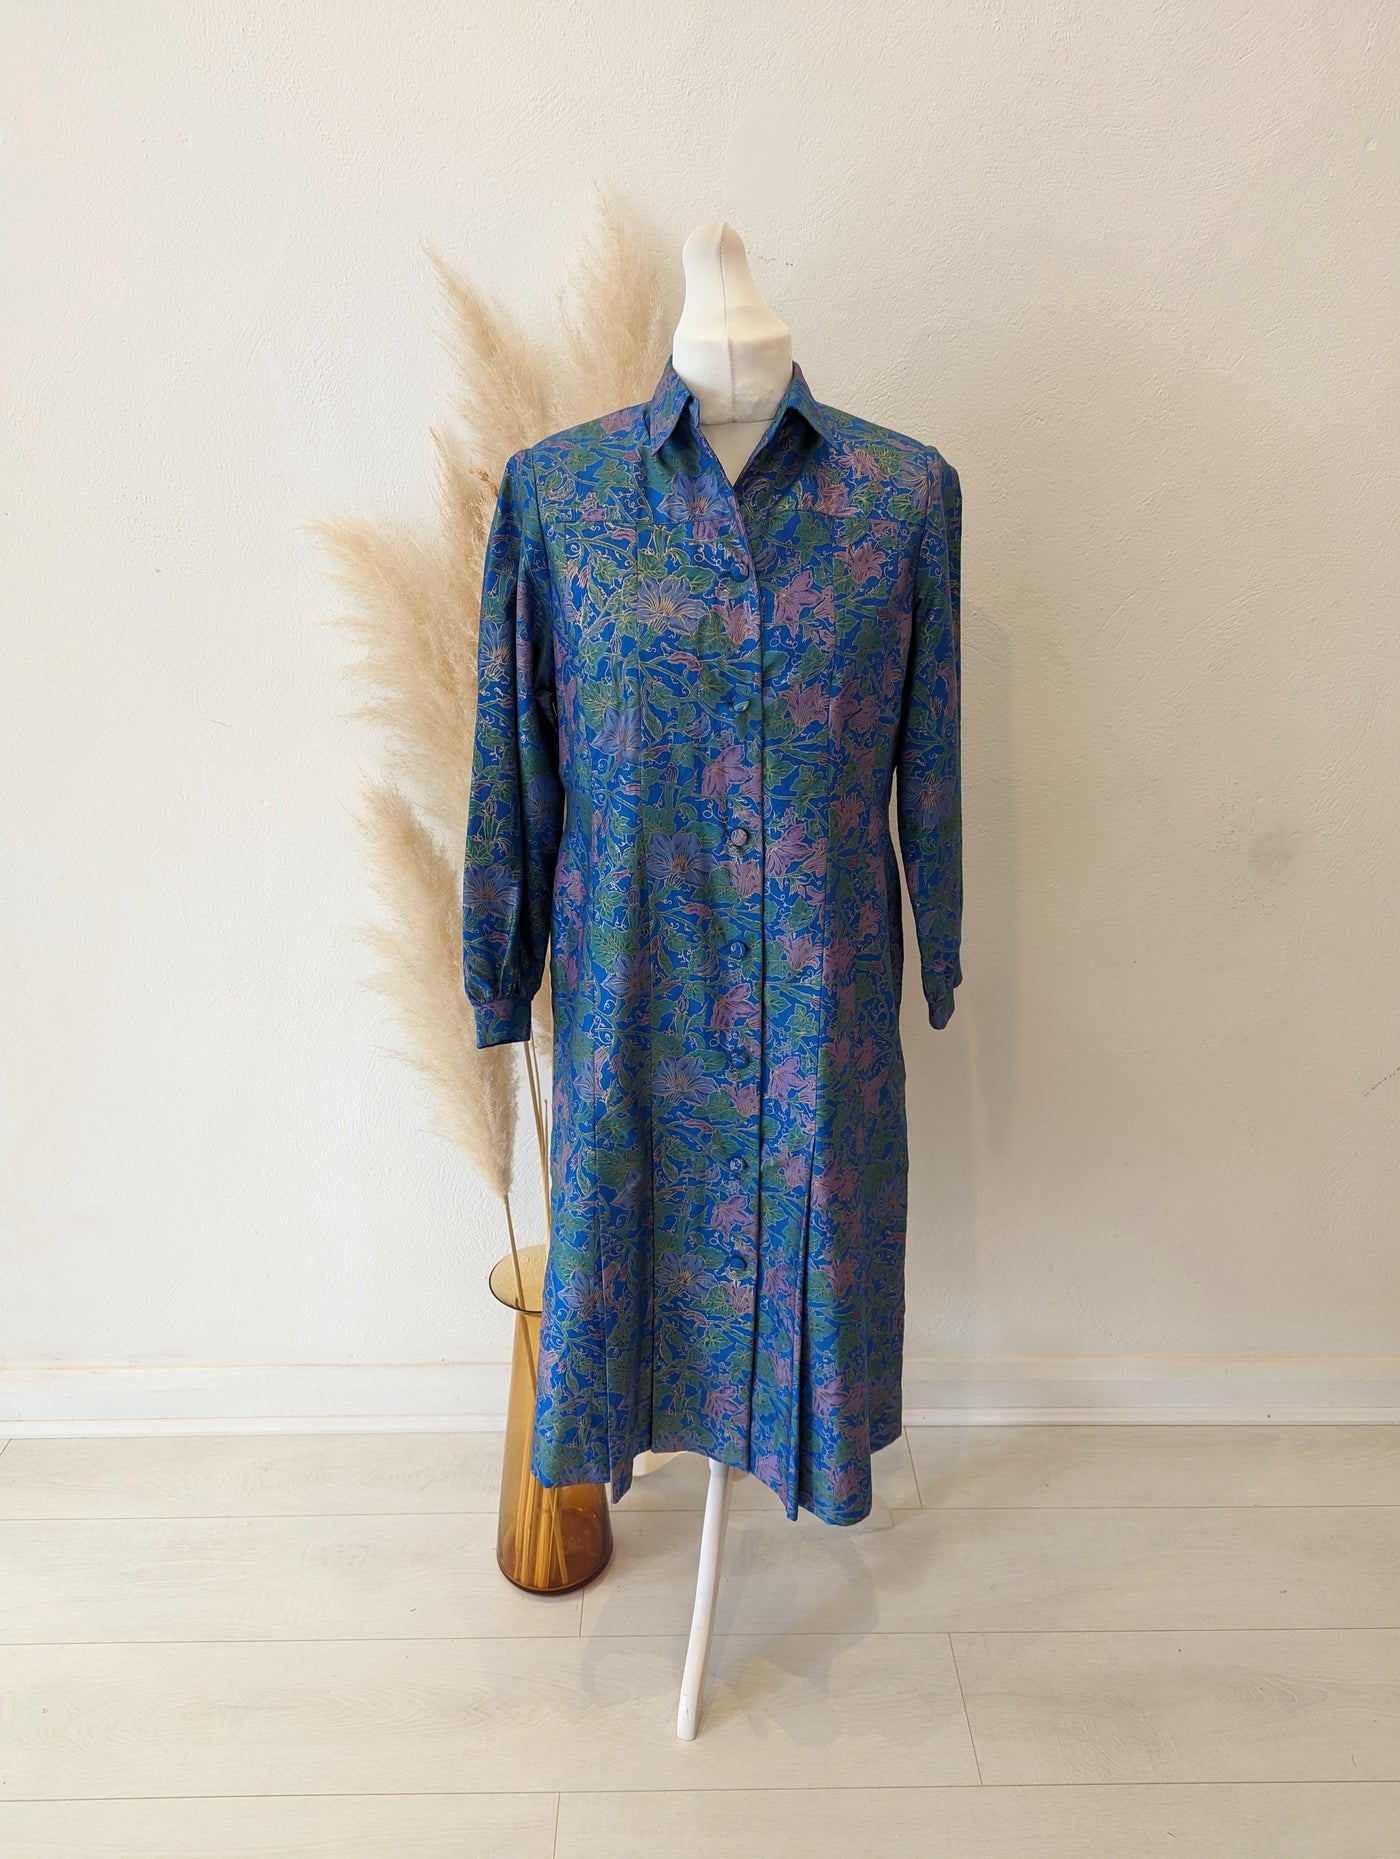 Handmade blue floral coat dress - up to a 14